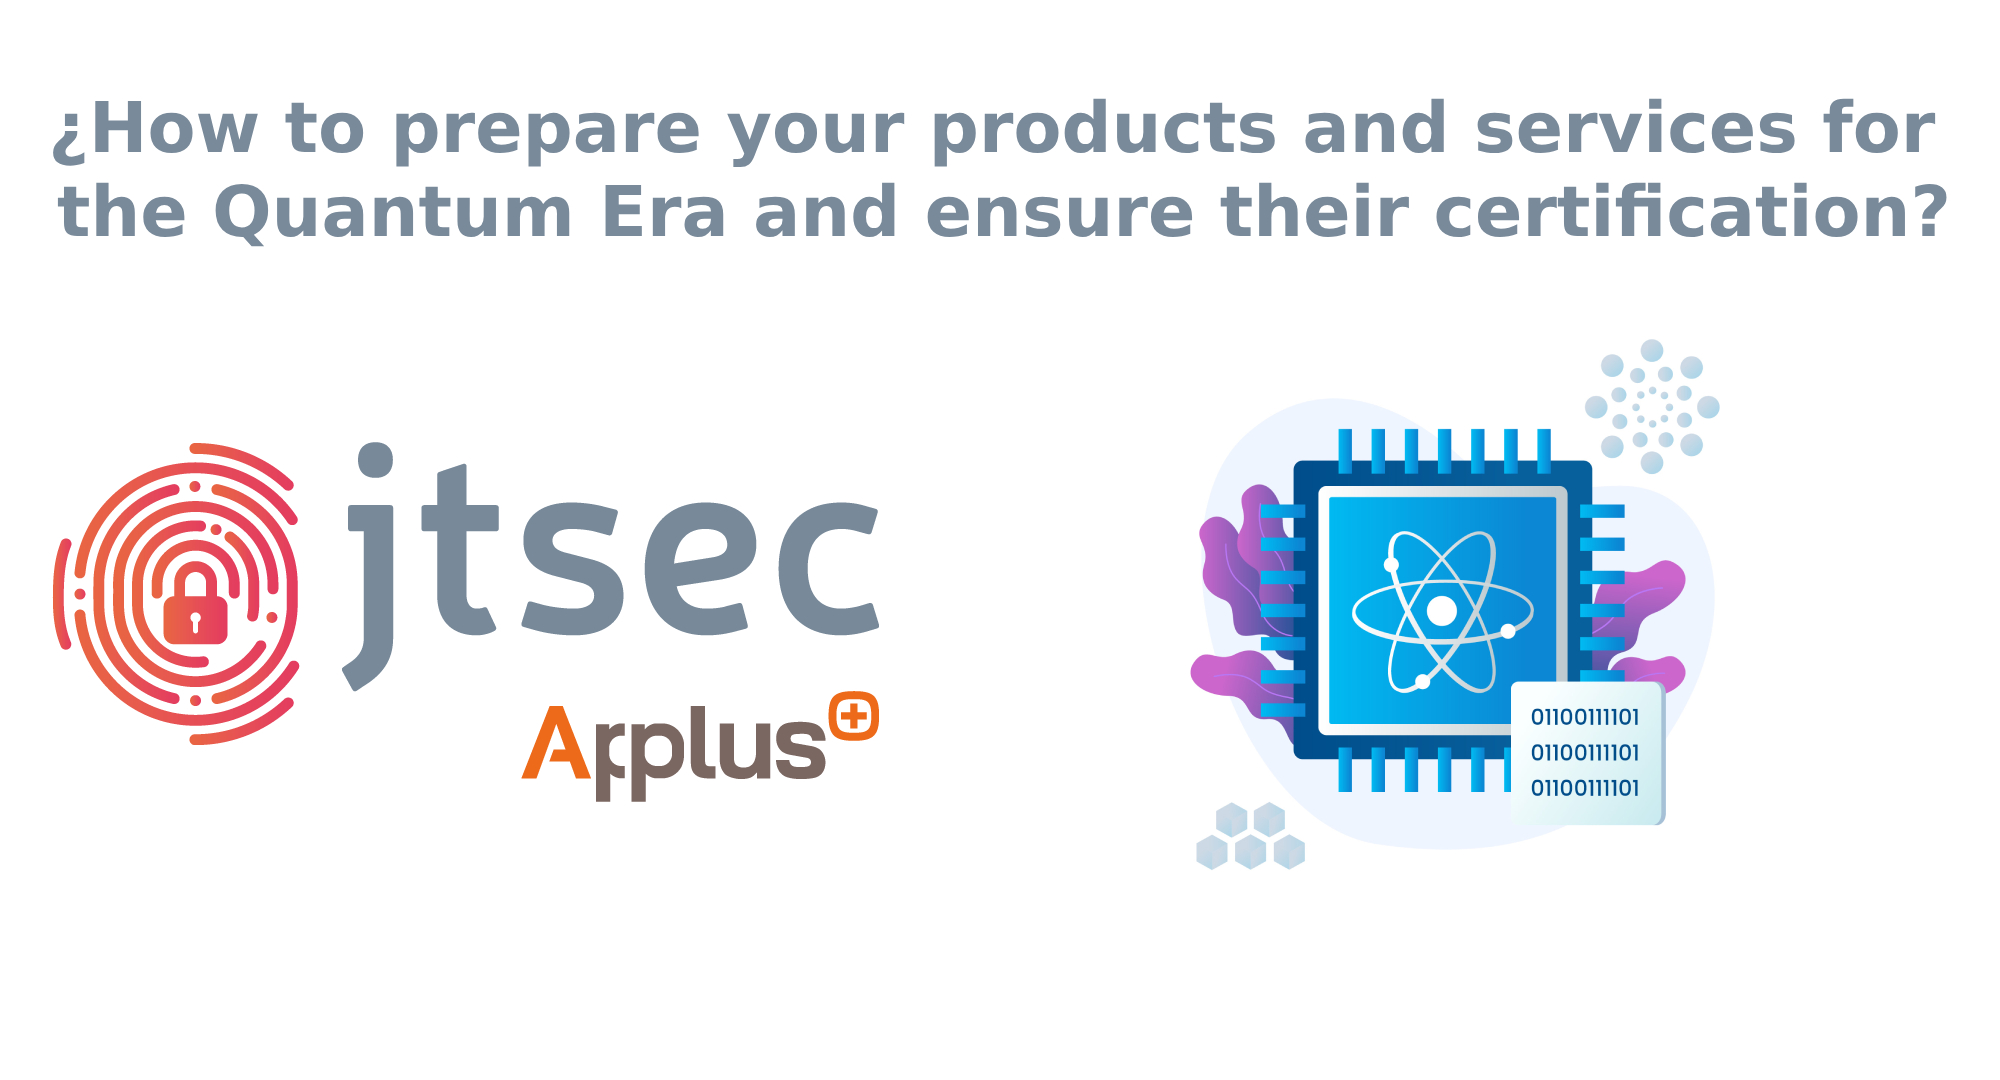  How to Prepare Your Products and Services for the Quantum Era and Ensure Their Certification?